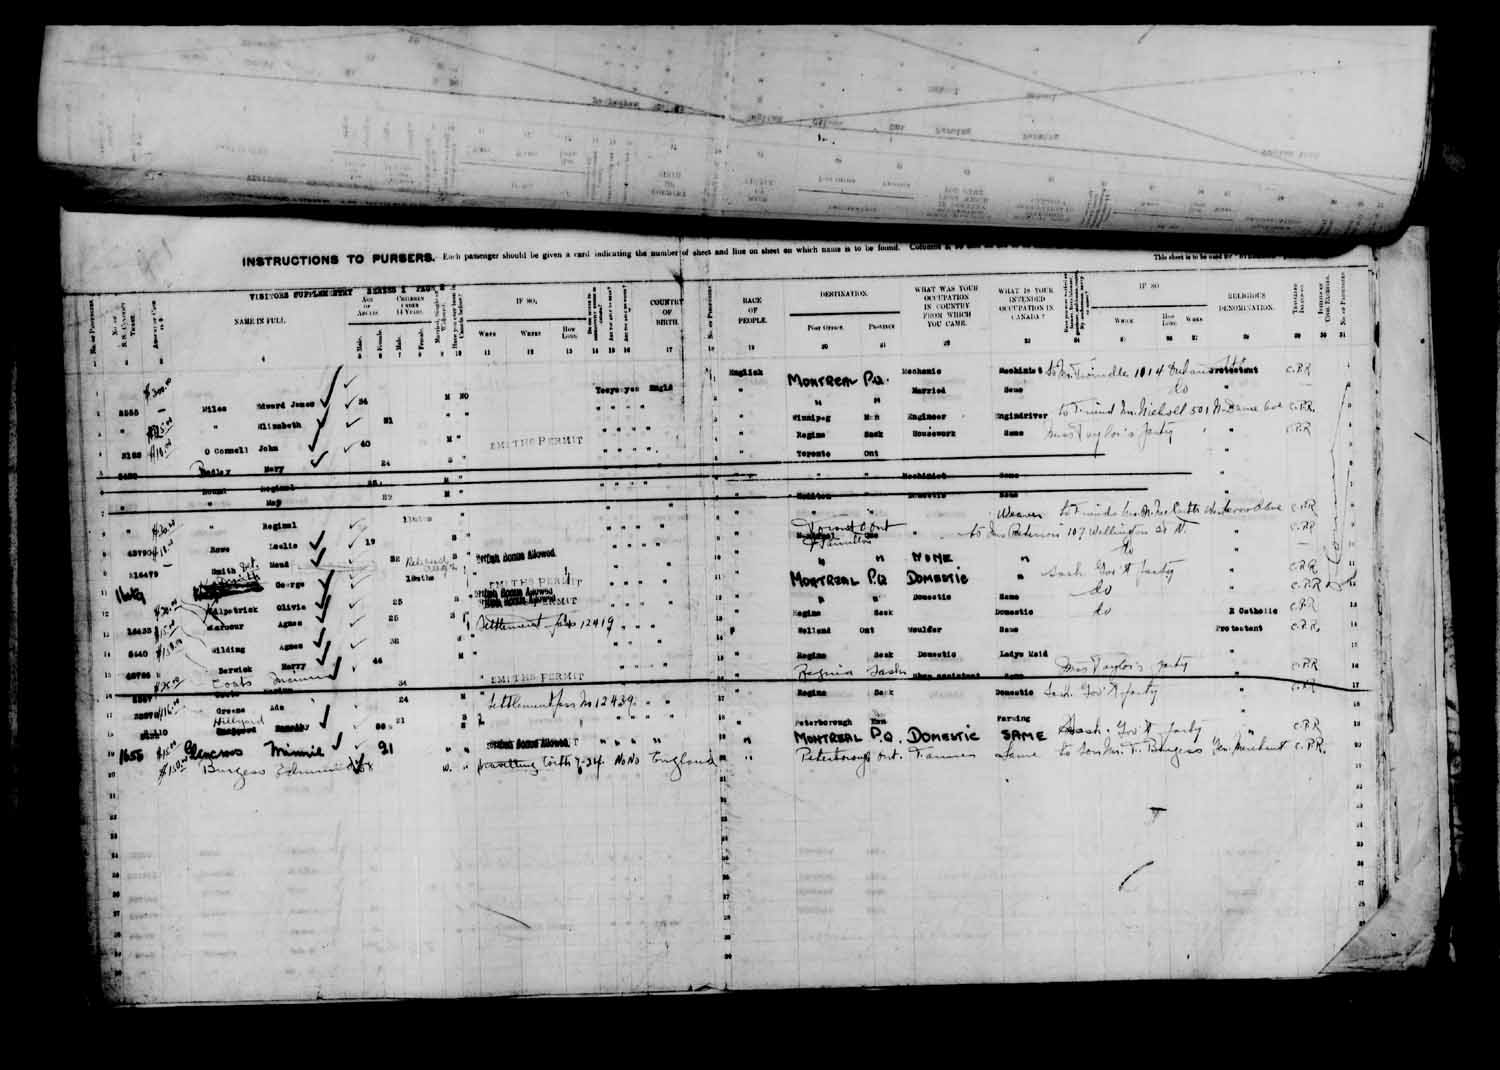 Digitized page of Passenger Lists for Image No.: e003610667